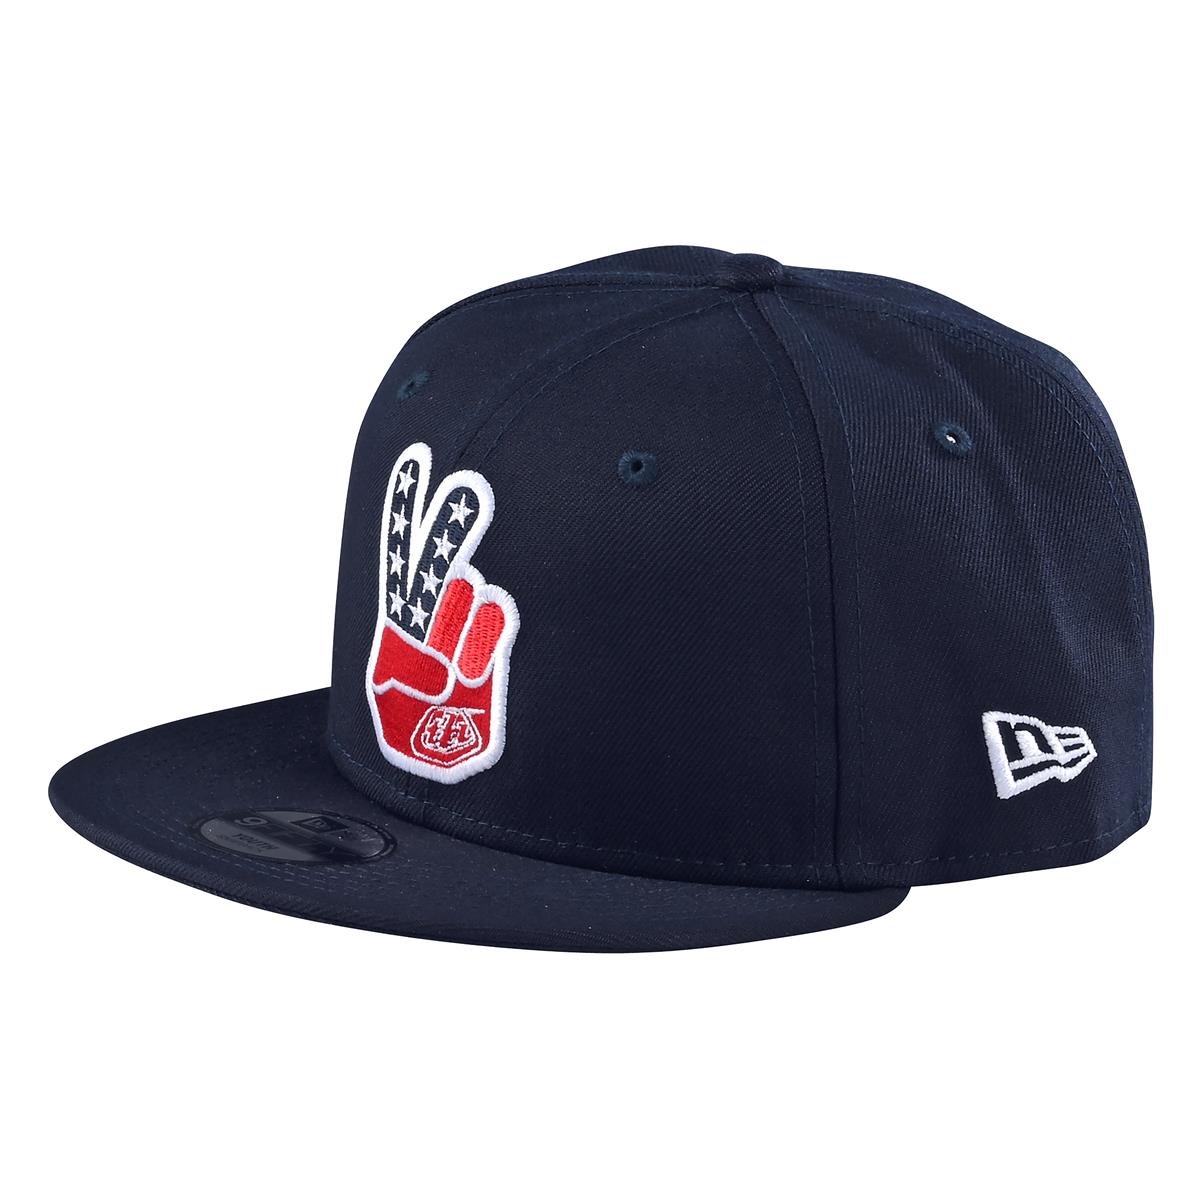 Troy Lee Designs Casquette Snap Back Peace Sign Navy